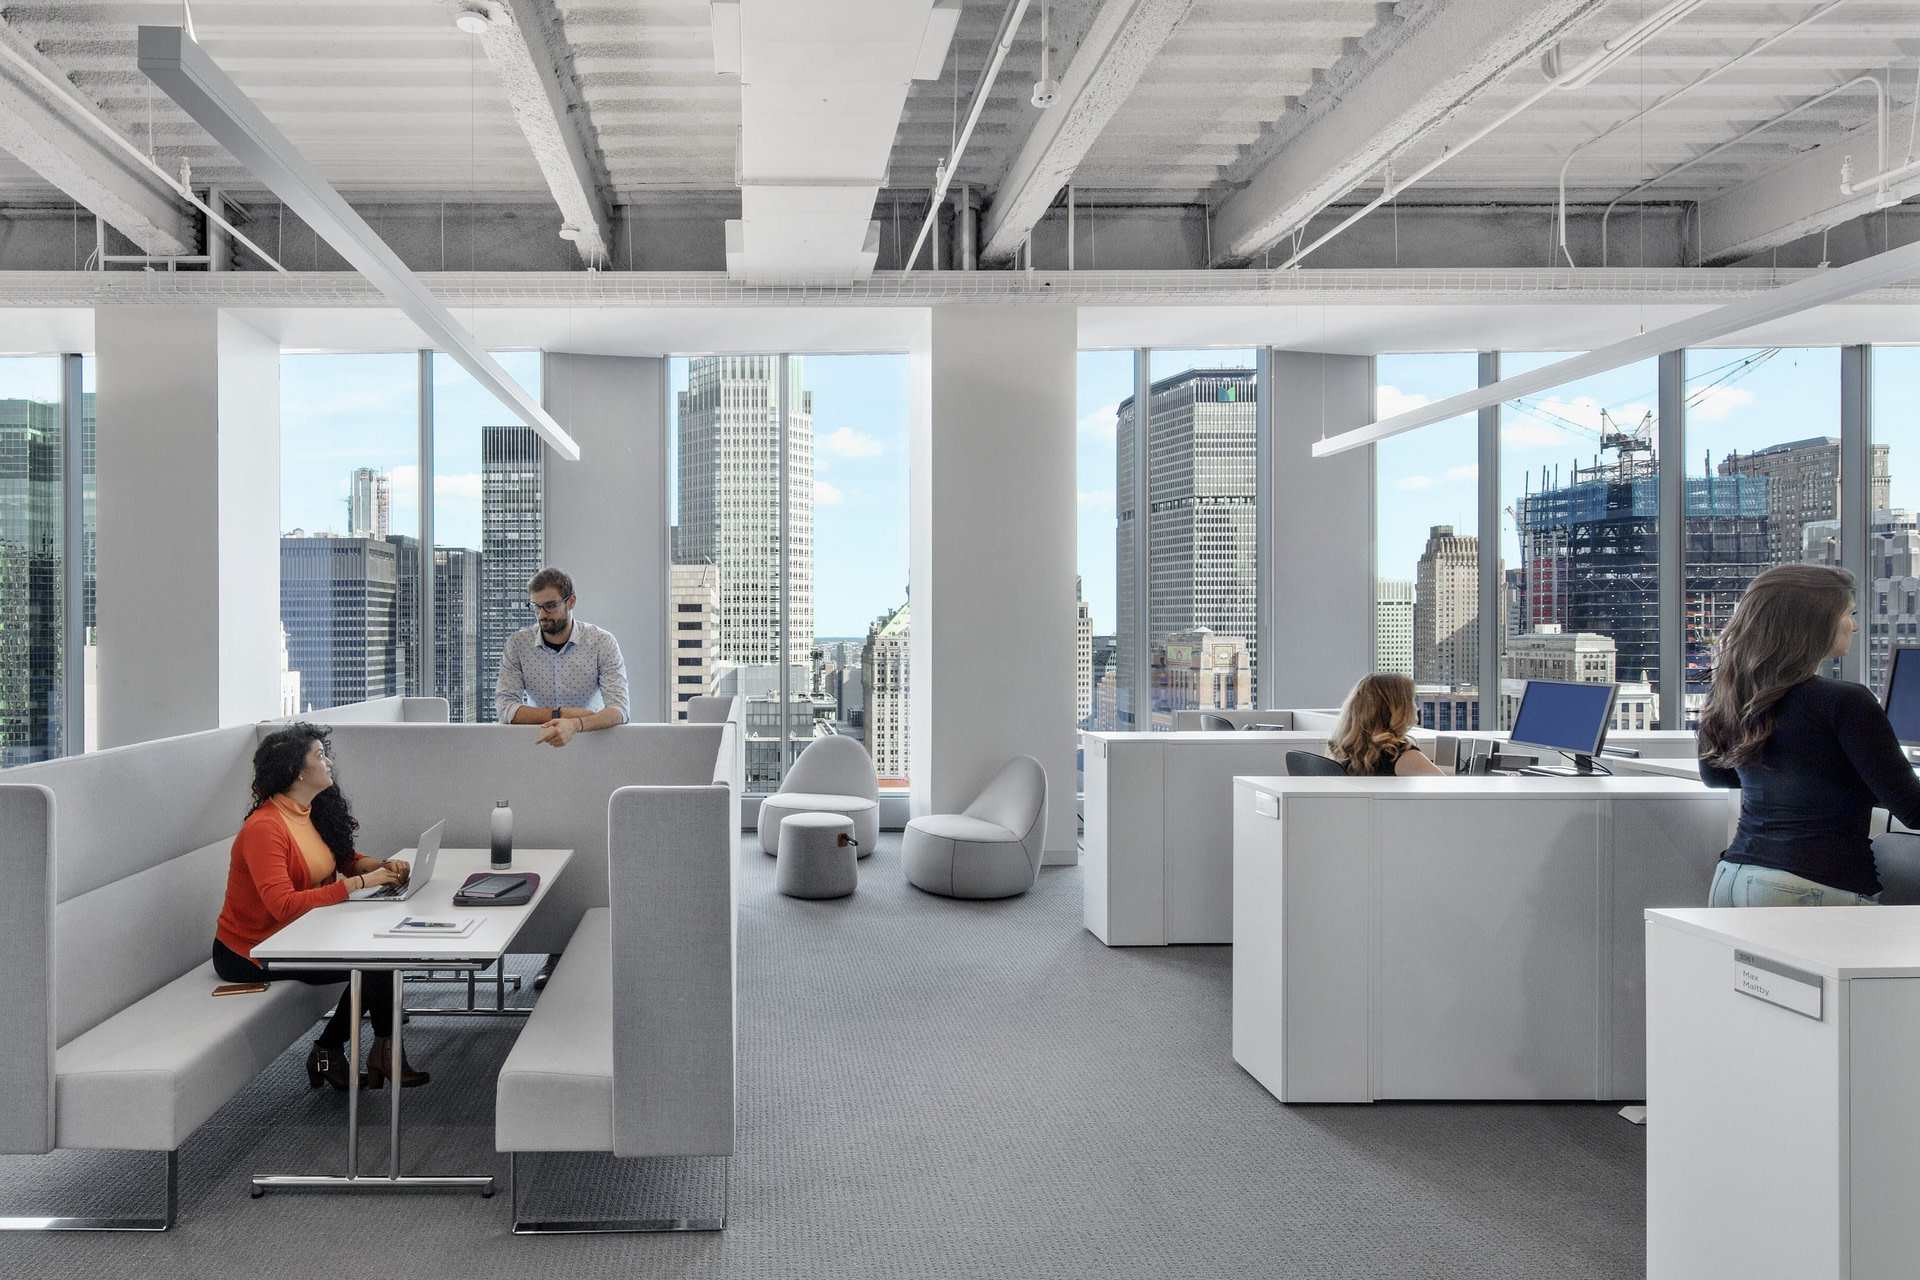 The group work space features full-length windows